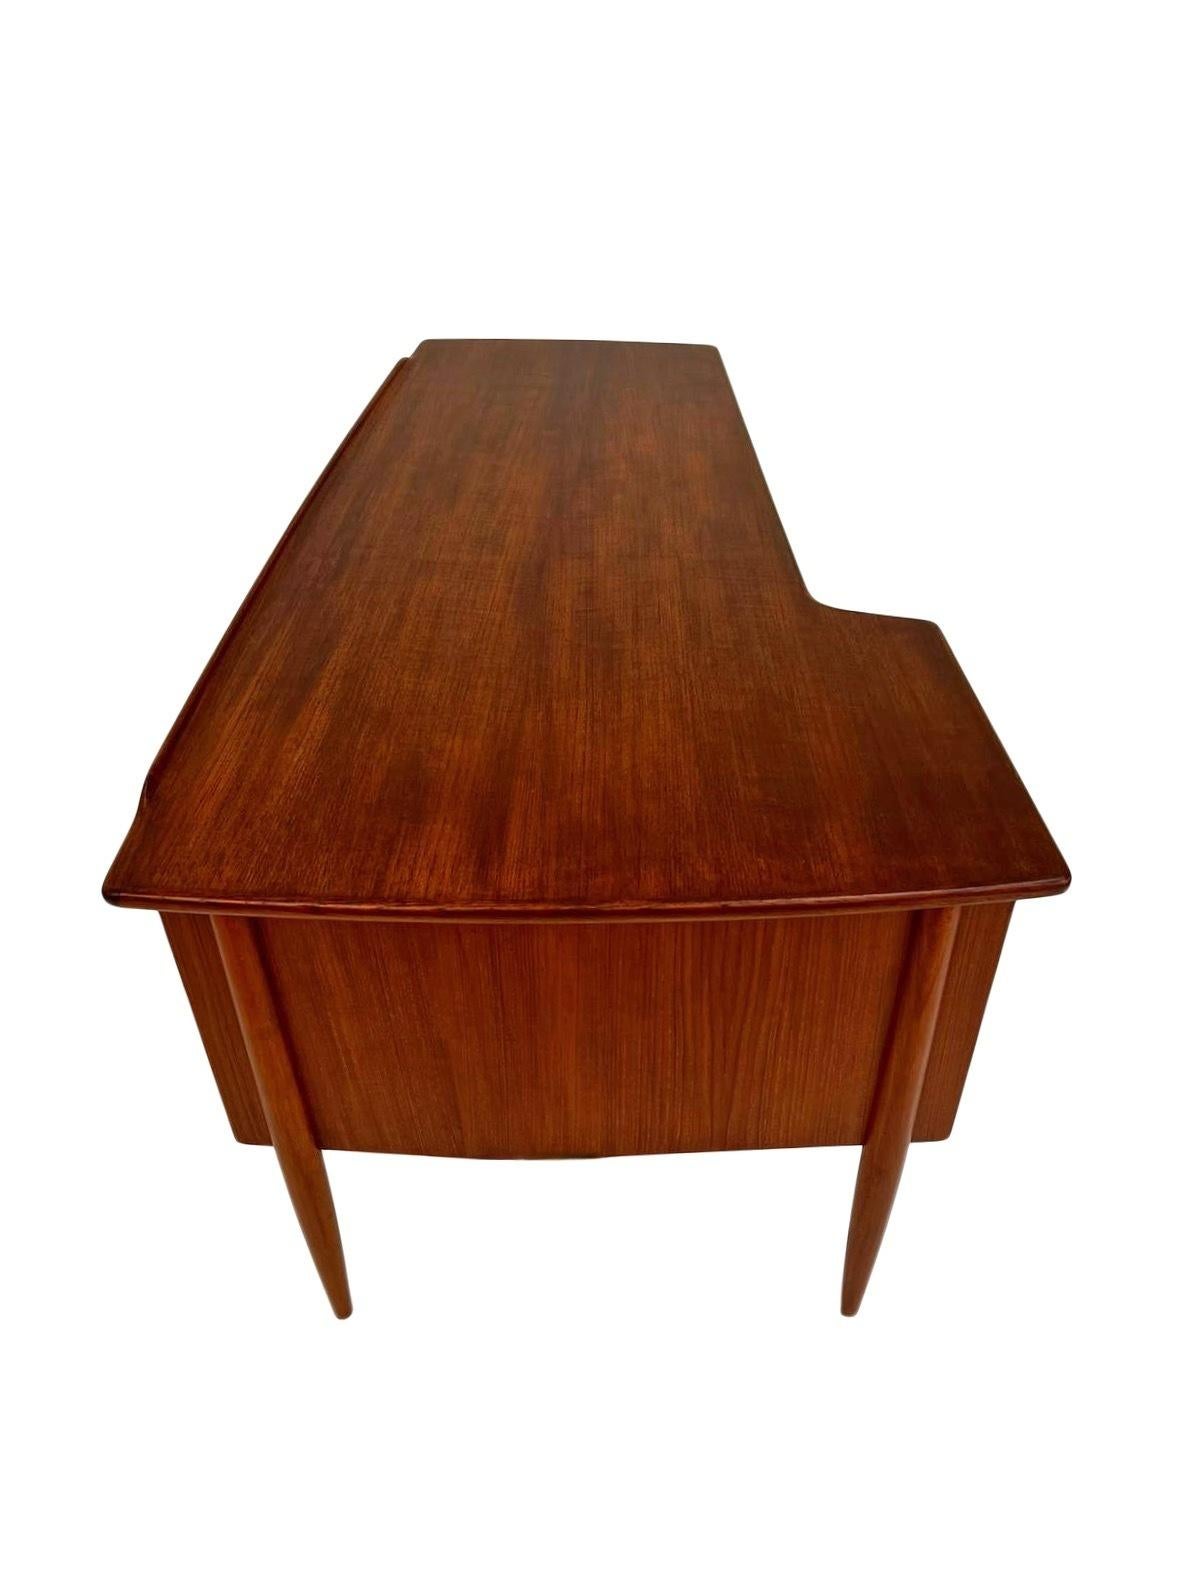 An iconic Swedish Model A10 teak writing desk designed by Göran Strand for Lelångs Möbelfabrik, this would make a stylish addition to any work area. A striking piece of classically designed Scandinavian furniture.

The desk has a bank of three